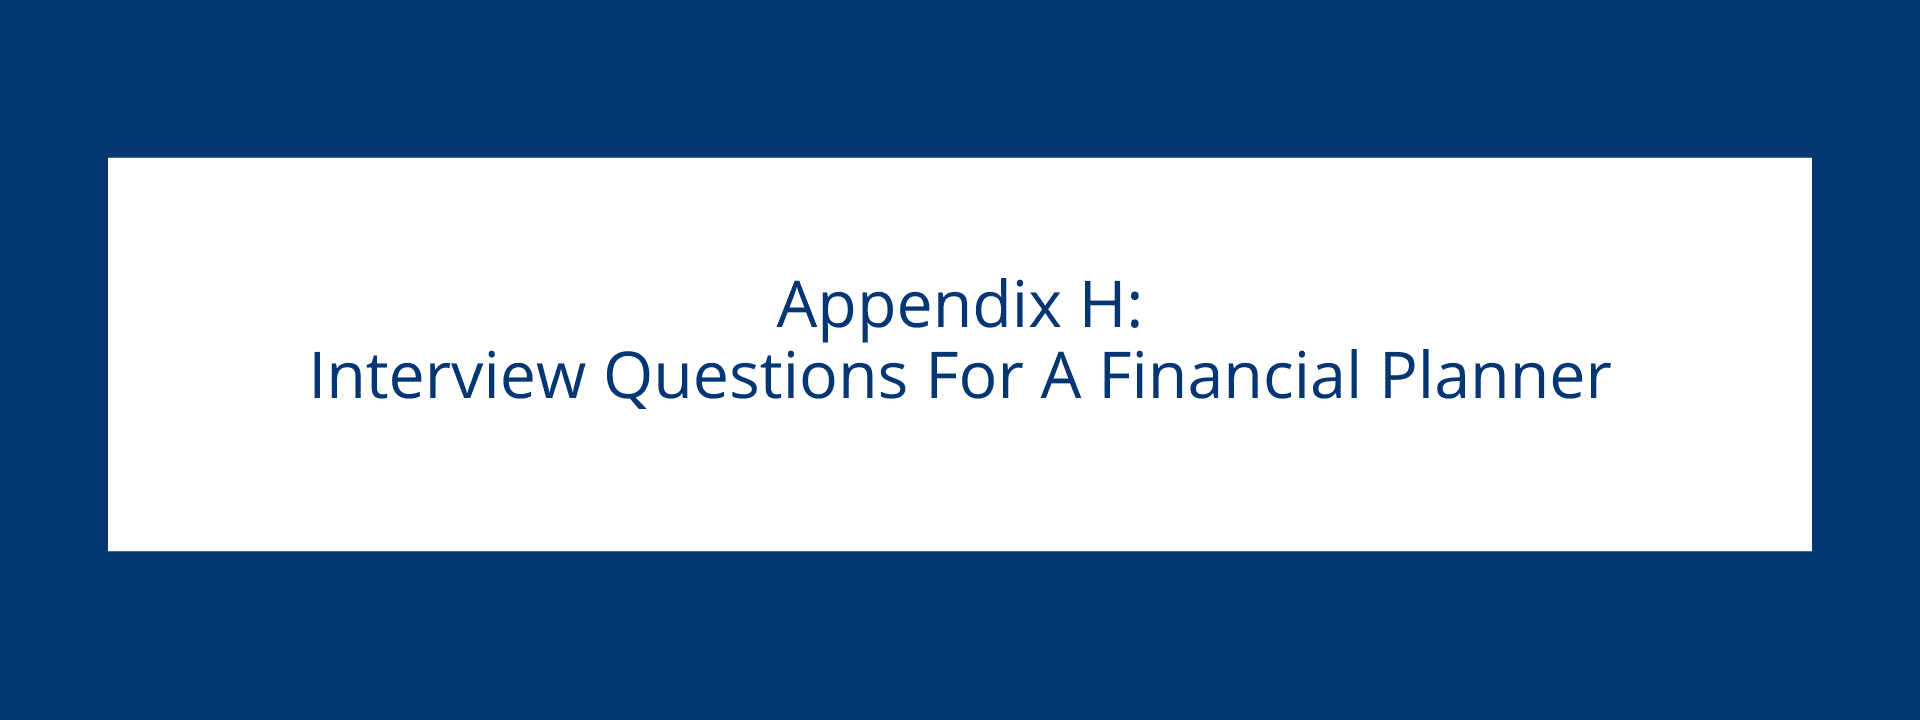 Interview Questions for a Financial Planner